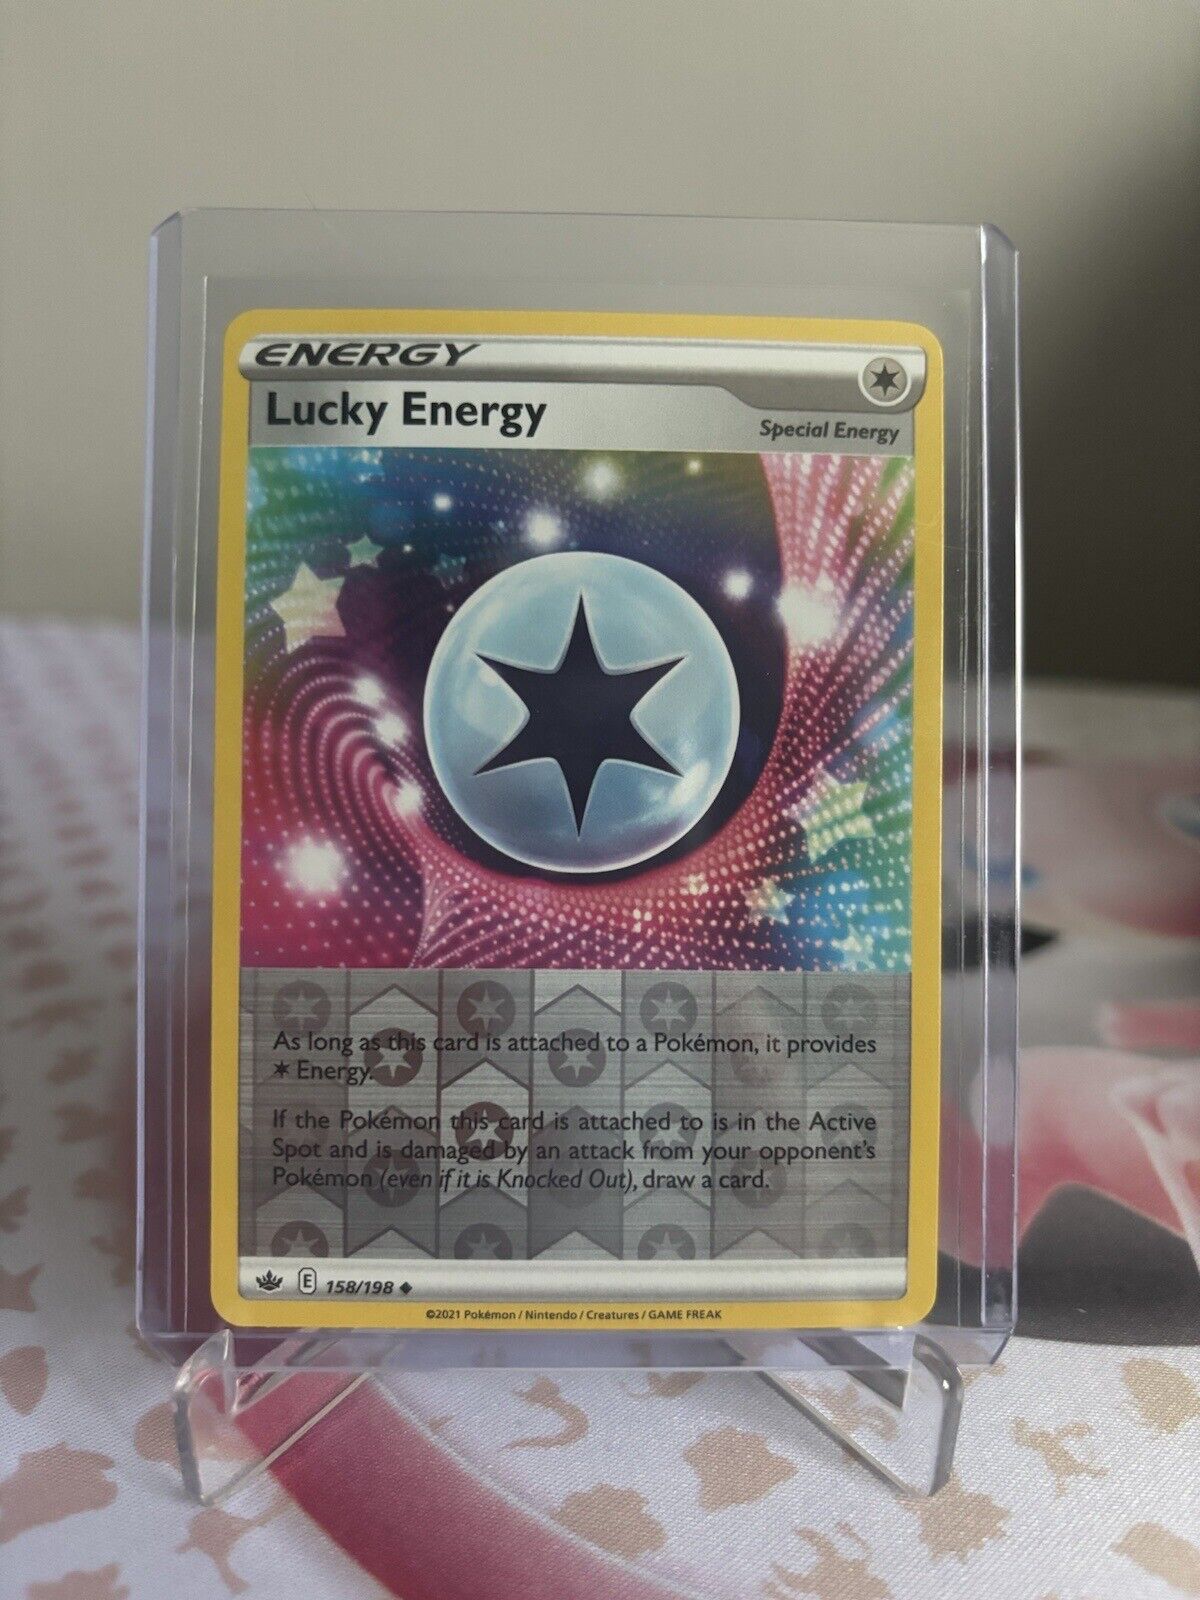 Lucky Energy Reverse Holo 158/198 - Chilling Reign Pokemon Card - NM/Mint